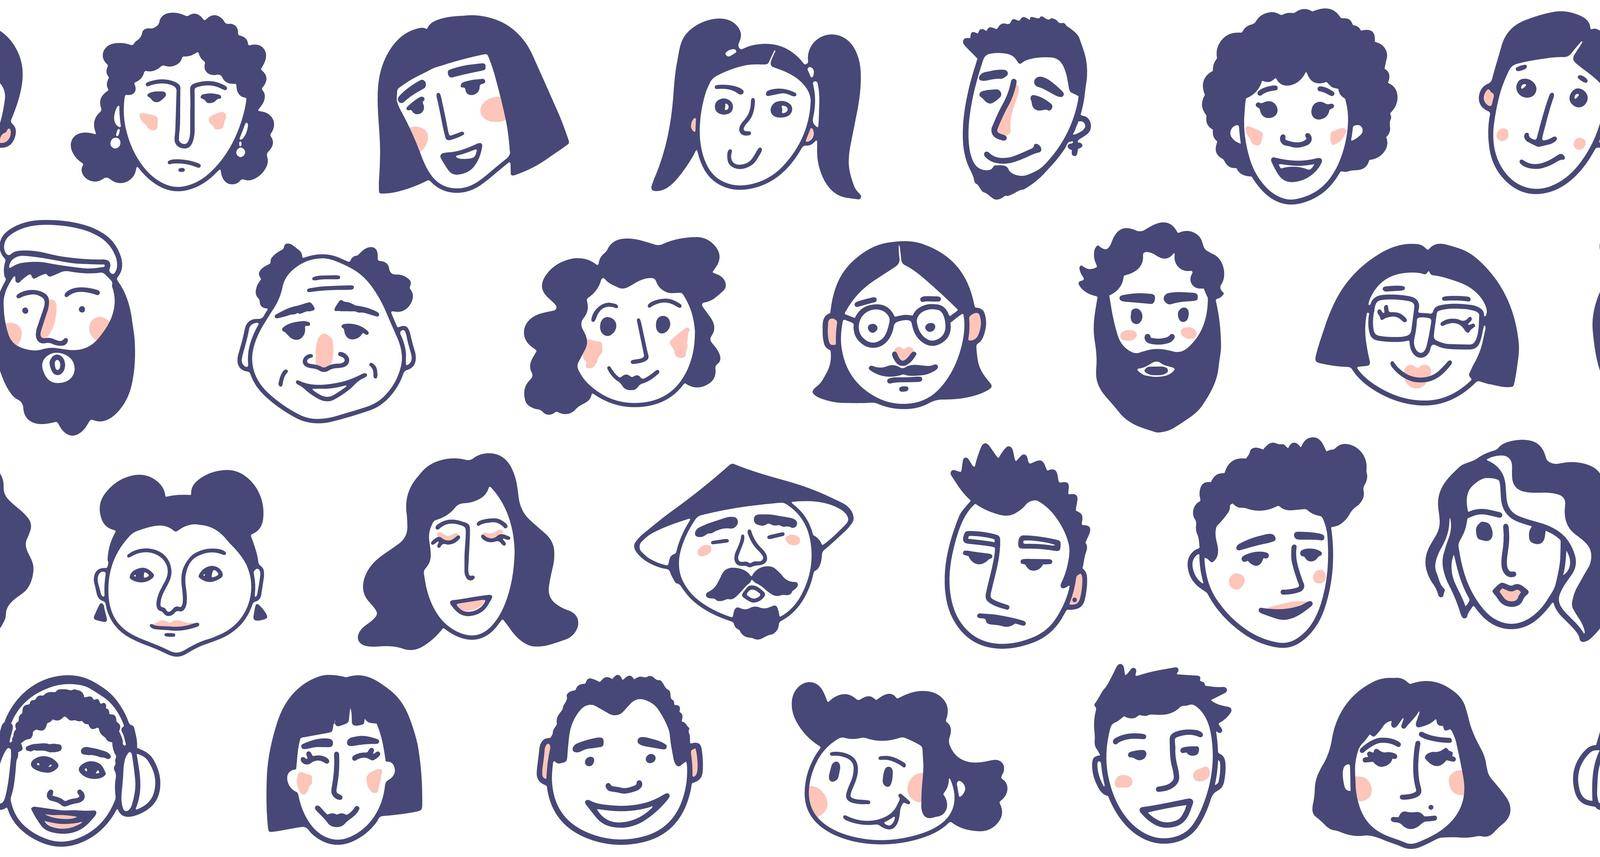 Cartoon faces hand drawn seamless pattern. Black and white background with cute doodle people by Lazy_Stocker